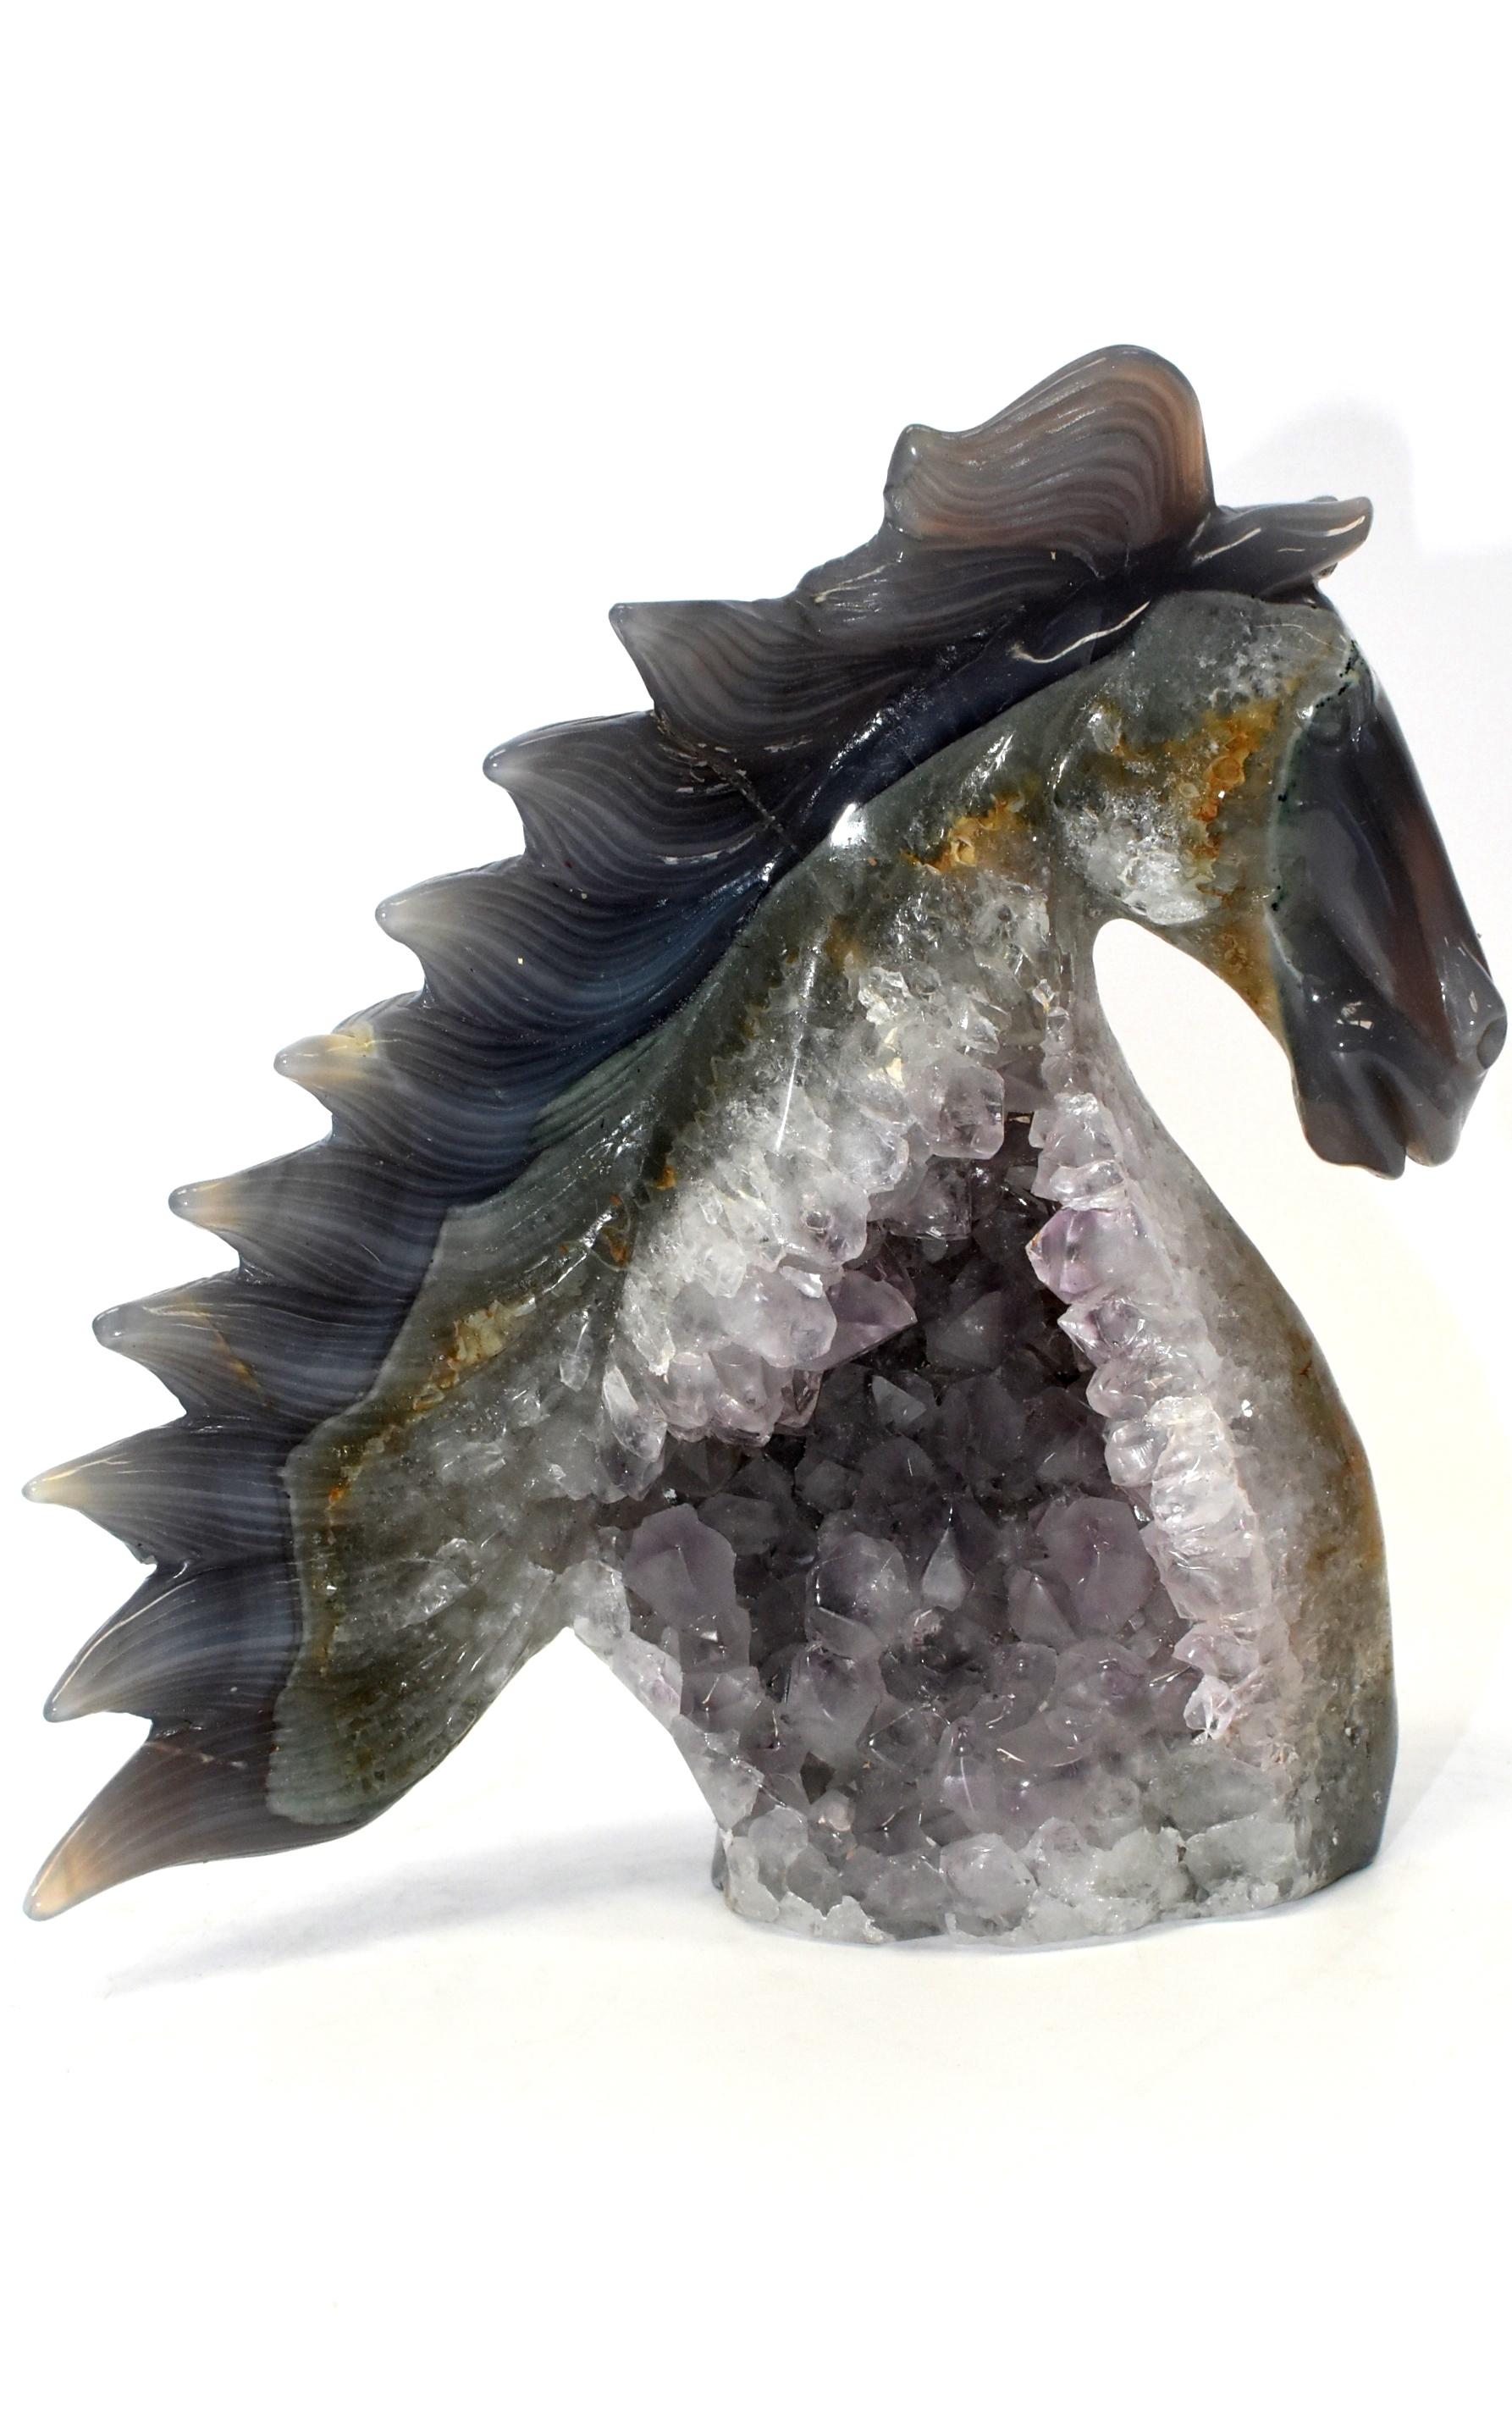 A stunning 2.7 lb, all natural agate horse bust. The sculpture preserved the original characters of the gem stone with amazing crystal formations. Great depictions of emotional eyes and magnificent mane. A fantastic sculpture that is at once elegant